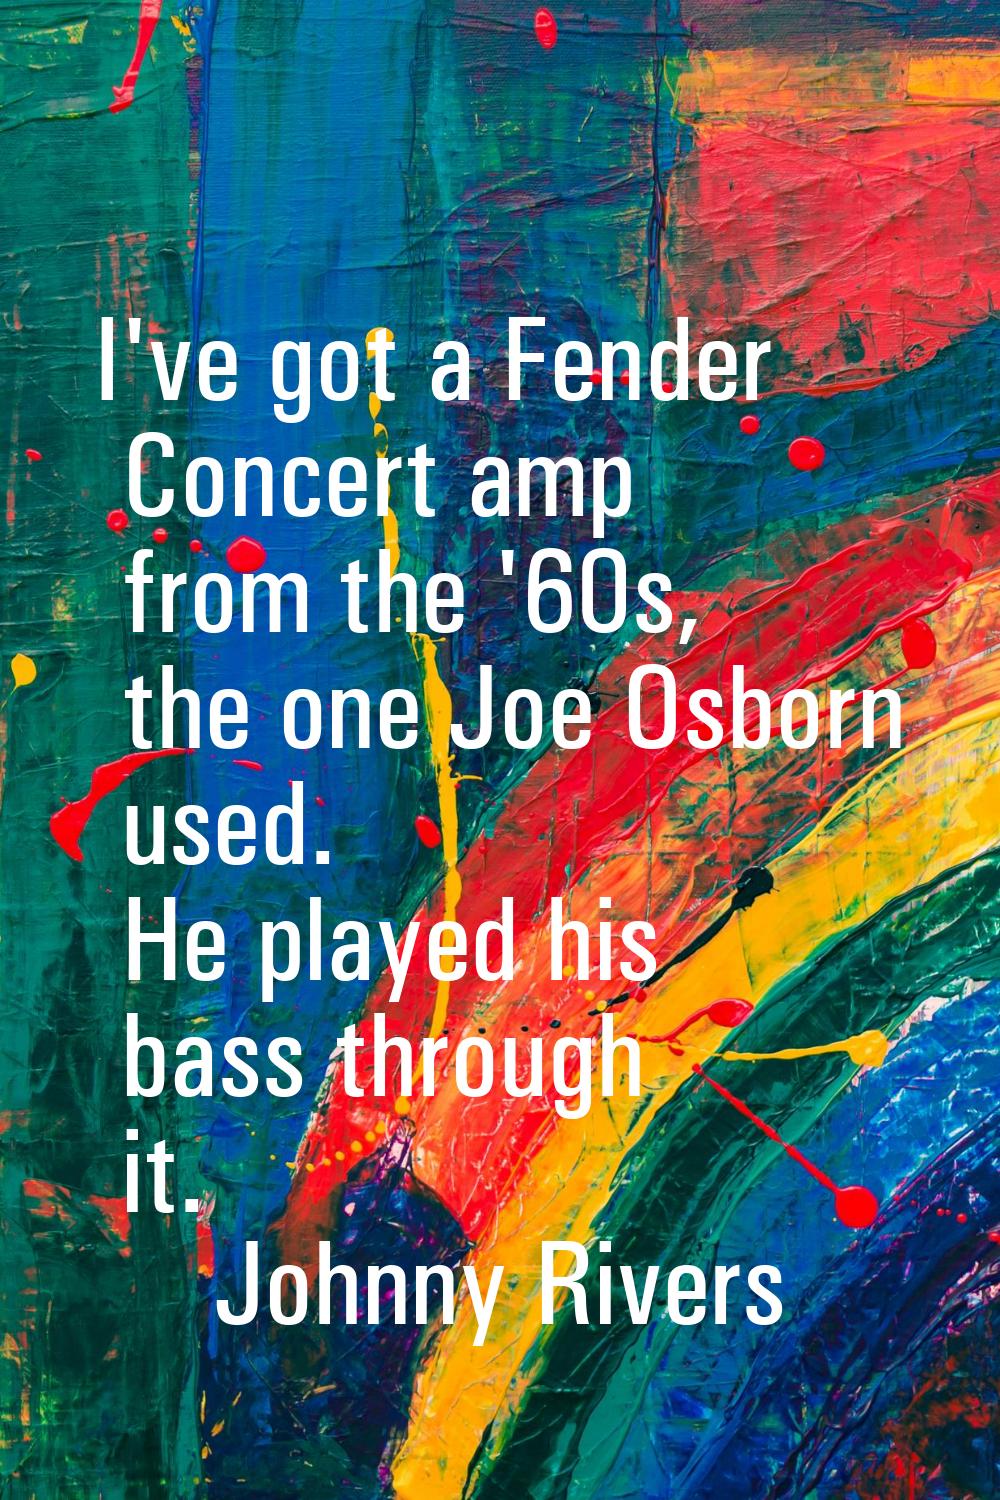 I've got a Fender Concert amp from the '60s, the one Joe Osborn used. He played his bass through it